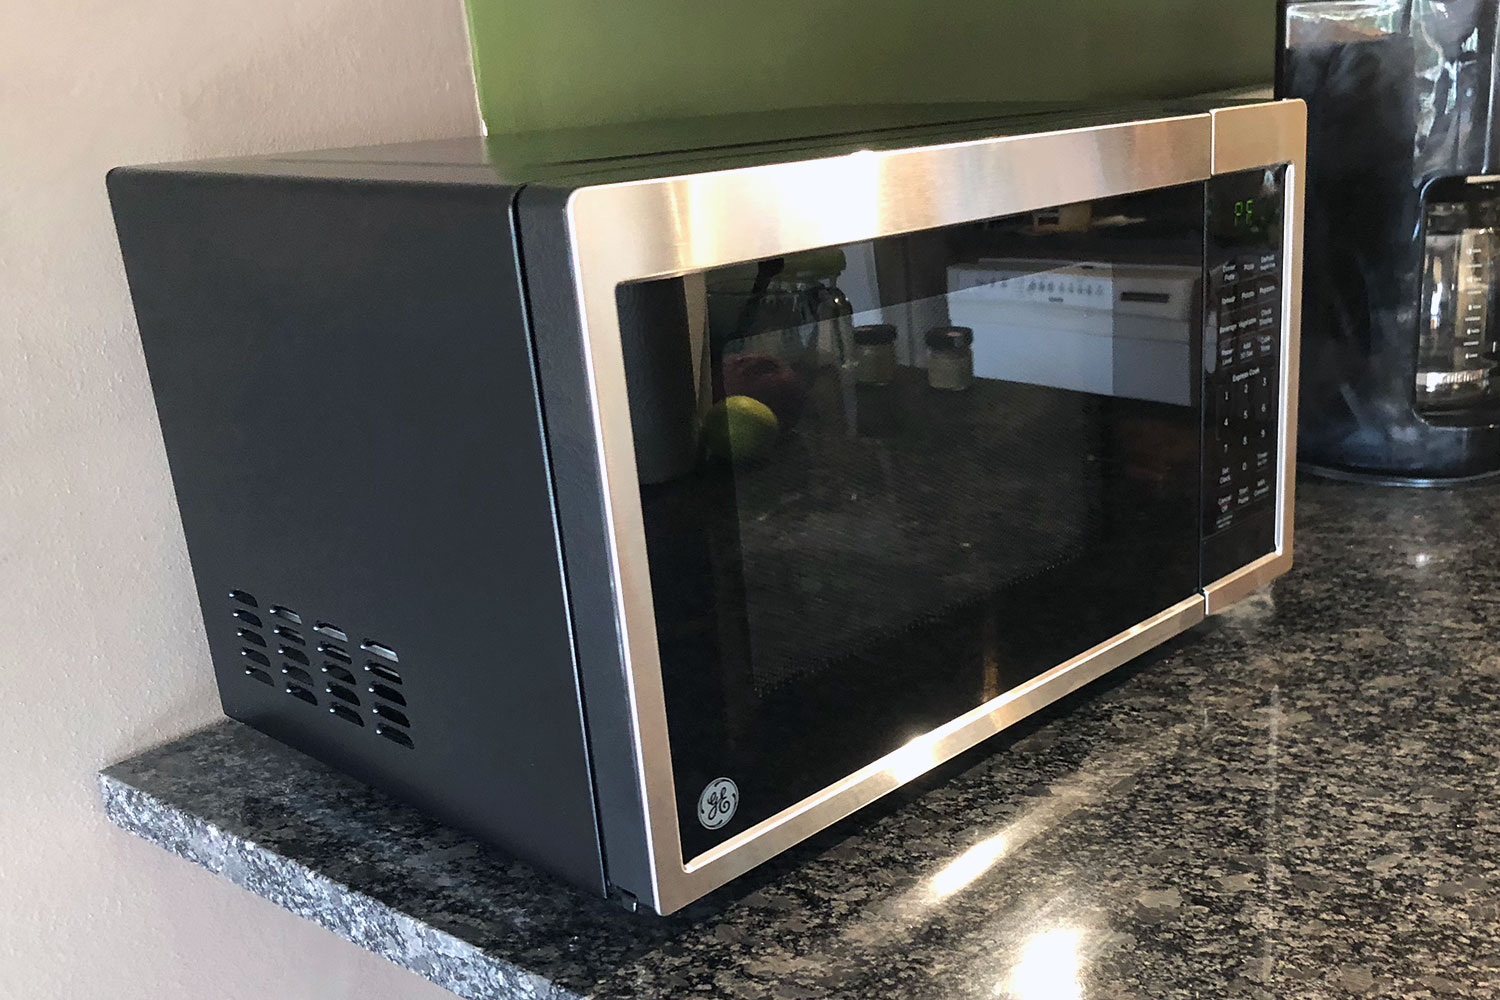 GE Smart Microwave With Scan-to-Cook Review 2023